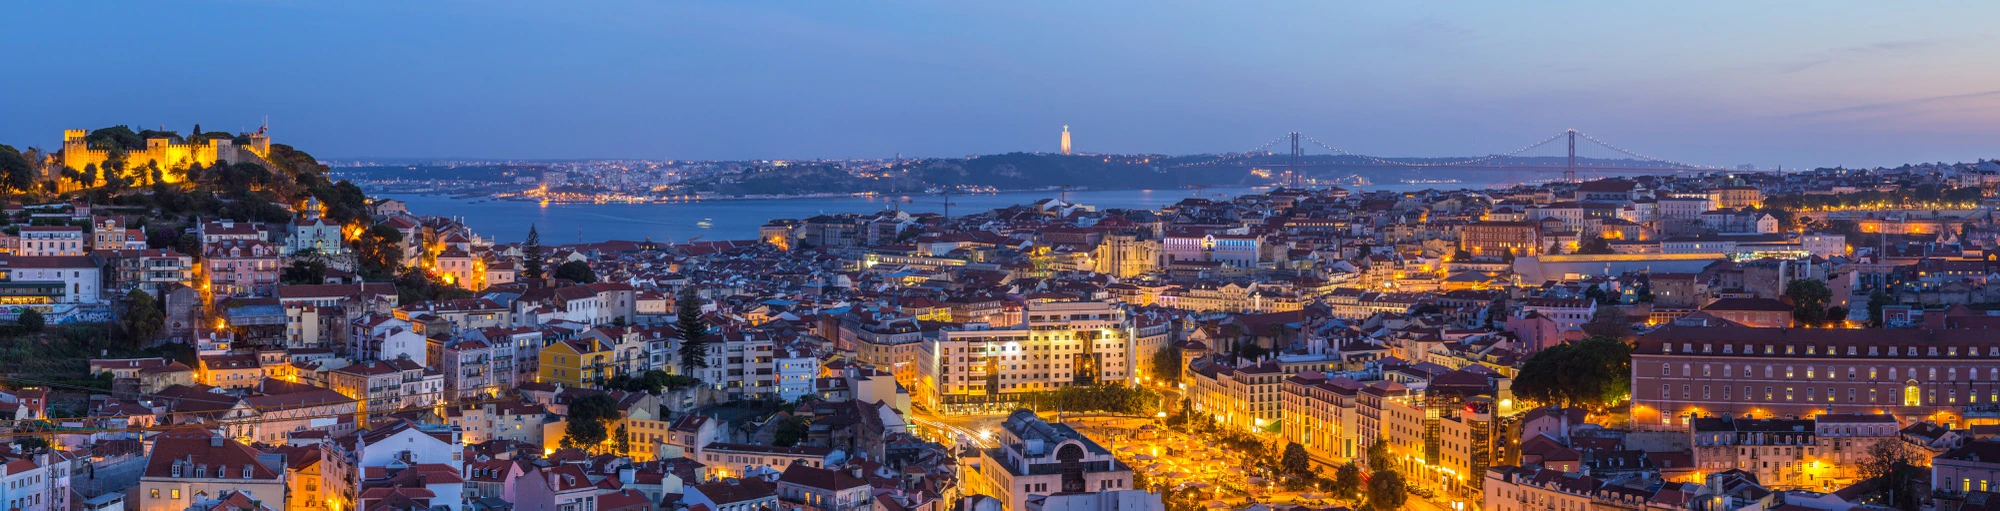 Wide panoramic night view of Lisbon showing the city lights and landmarks